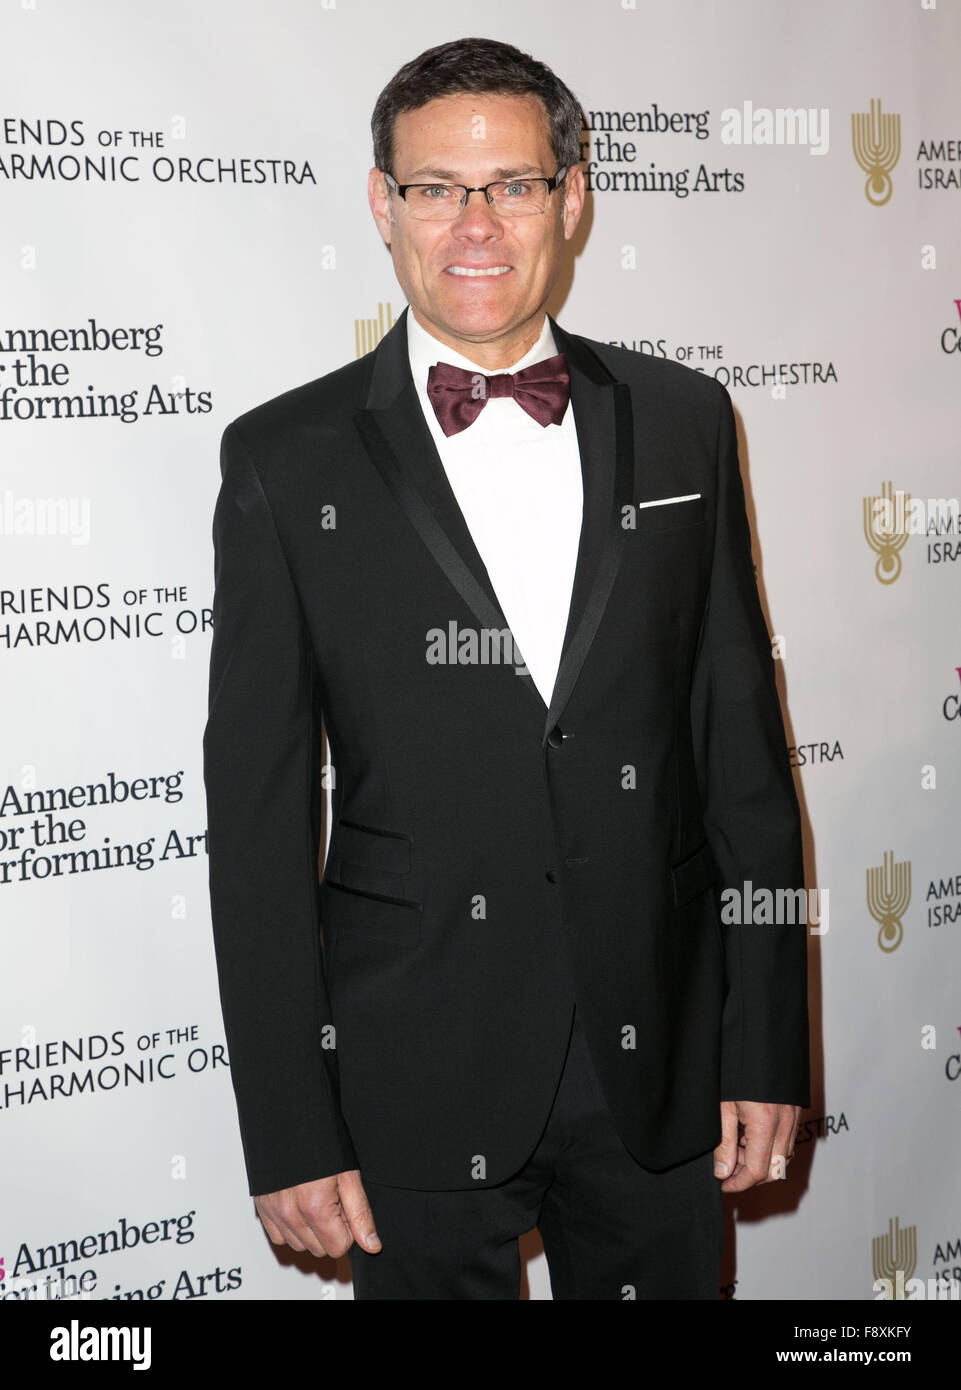 Celebrities attend The Wallis Annenberg Center for the Performing Arts and the American Friends of the Israel Philharmonic Orchestra’s “Duet Gala” at Wallis Annenberg Center for the Performing Arts in Beverly Hills.  Featuring: David Siegel Where: Los Ang Stock Photo